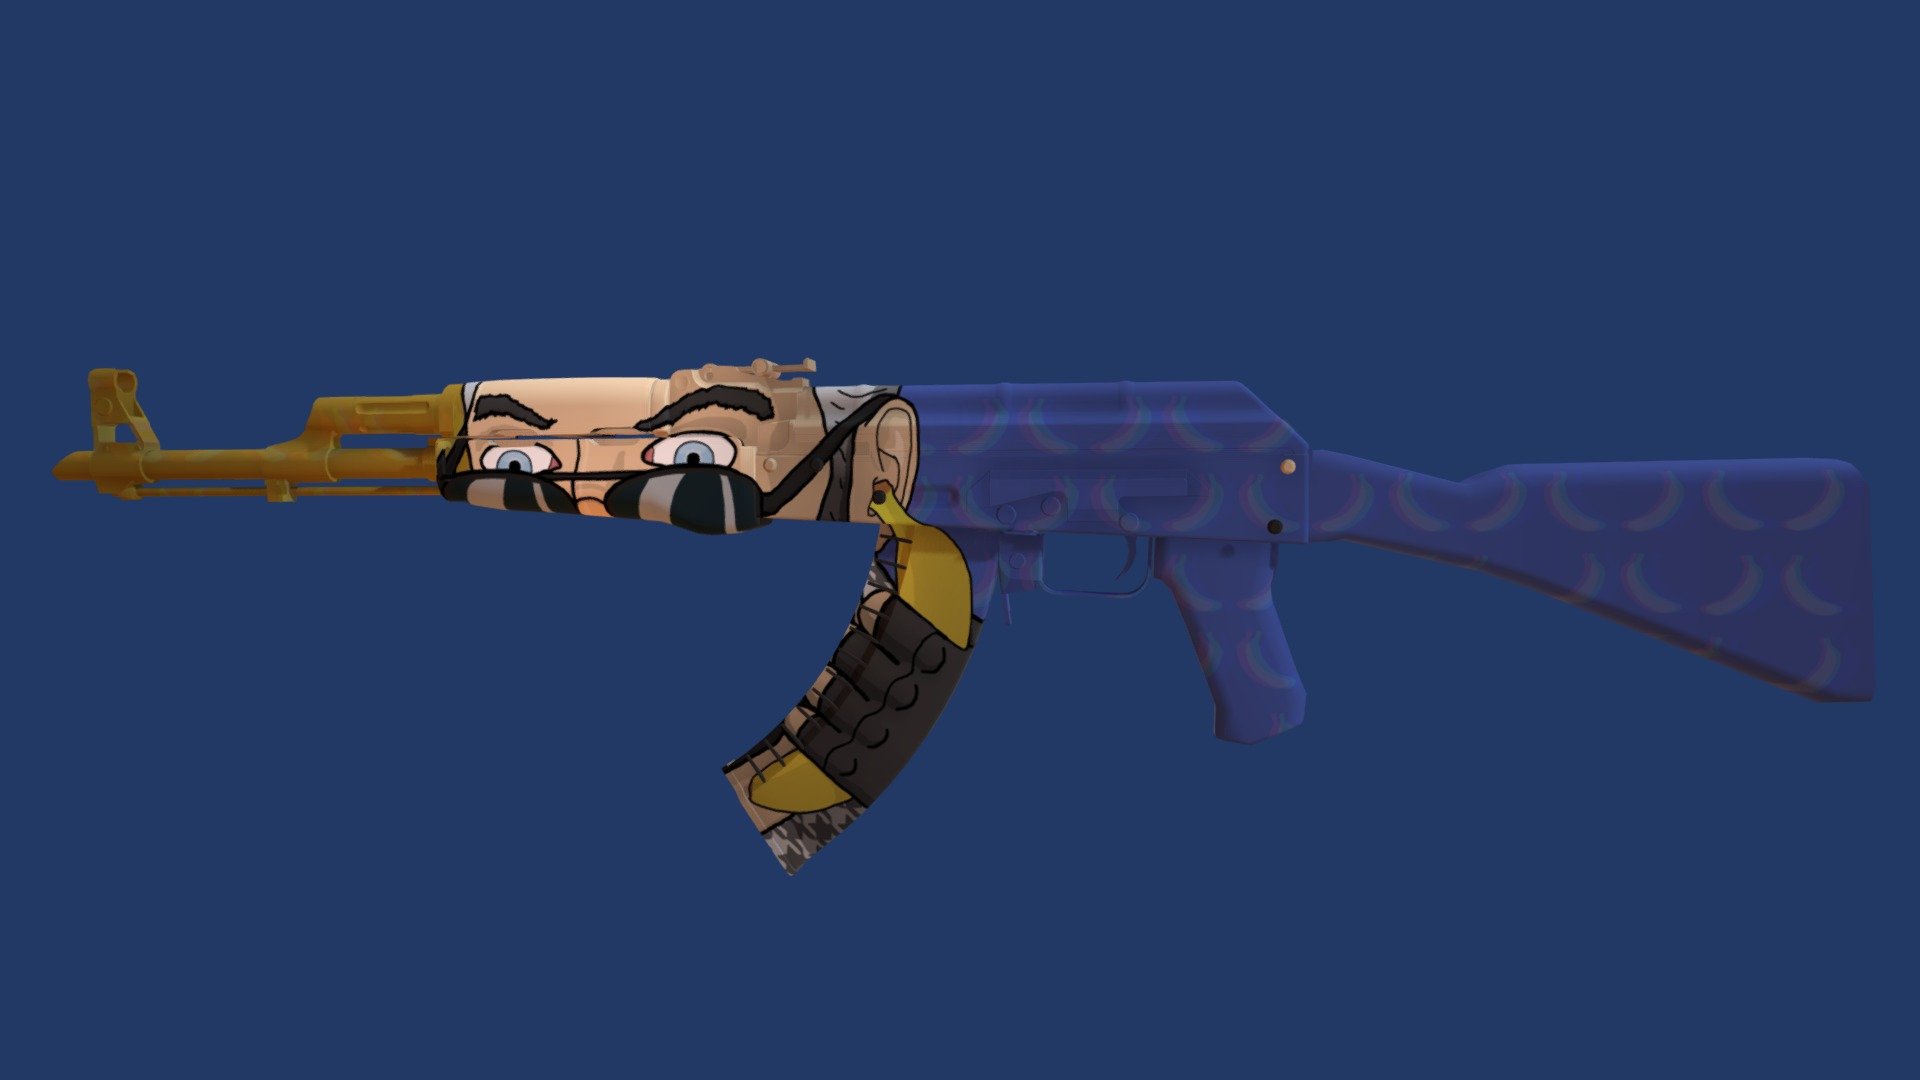 For csgo, man has received a bad call.
http://steamcommunity.com/sharedfiles/filedetails/?id=1329644448&amp;searchtext= - Bad Call AK - 3D model by ElZombo 3d model